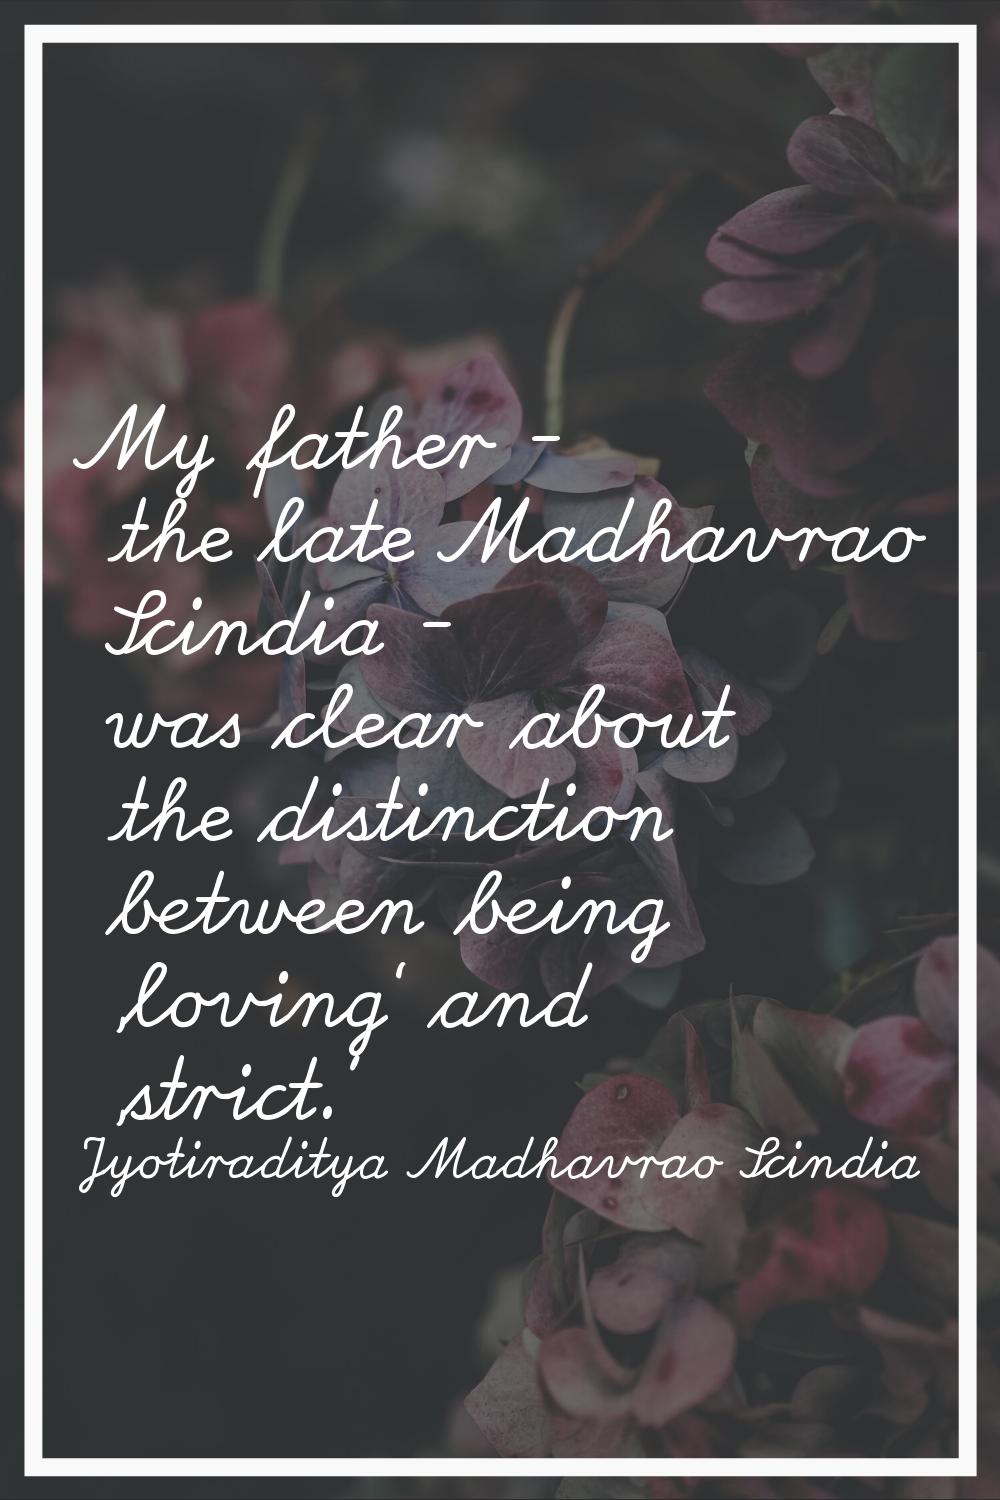 My father - the late Madhavrao Scindia - was clear about the distinction between being 'loving' and